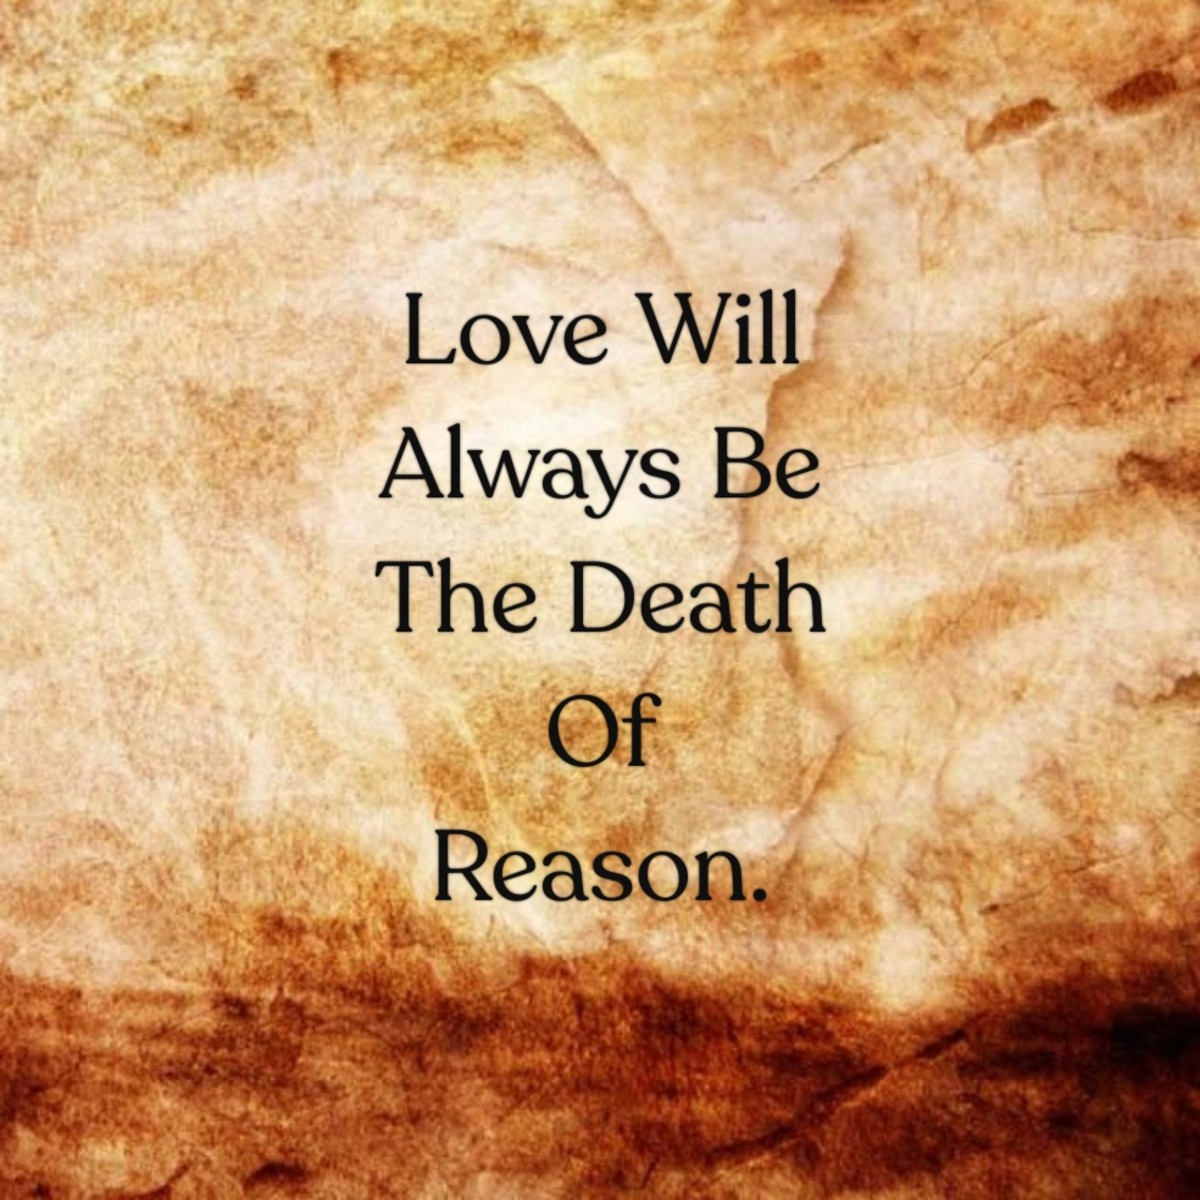 Love Will Always Be the Death of Reason.